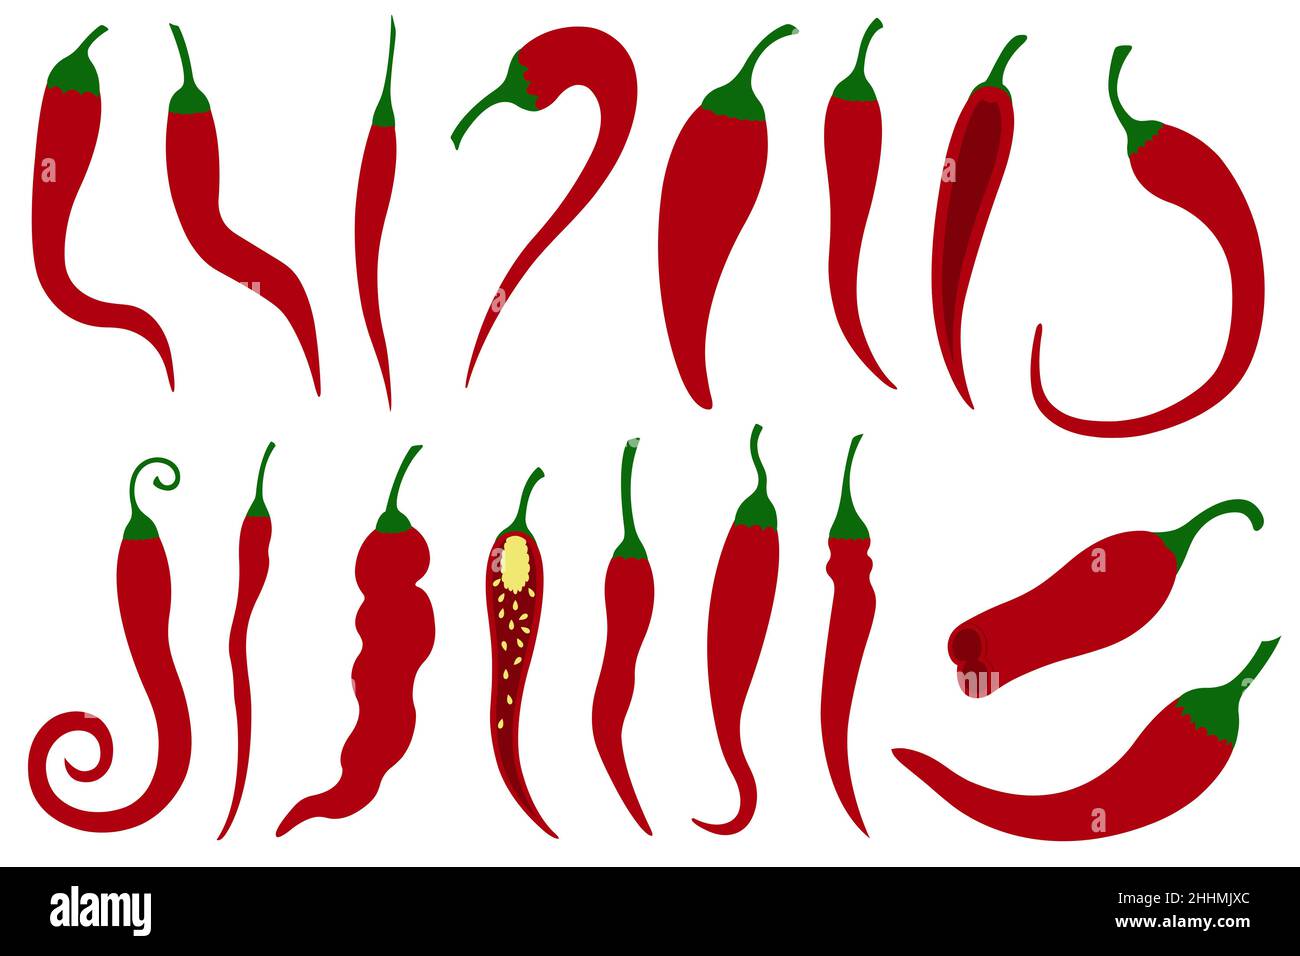 Group of different red chili peppers isolated on white Stock Photo